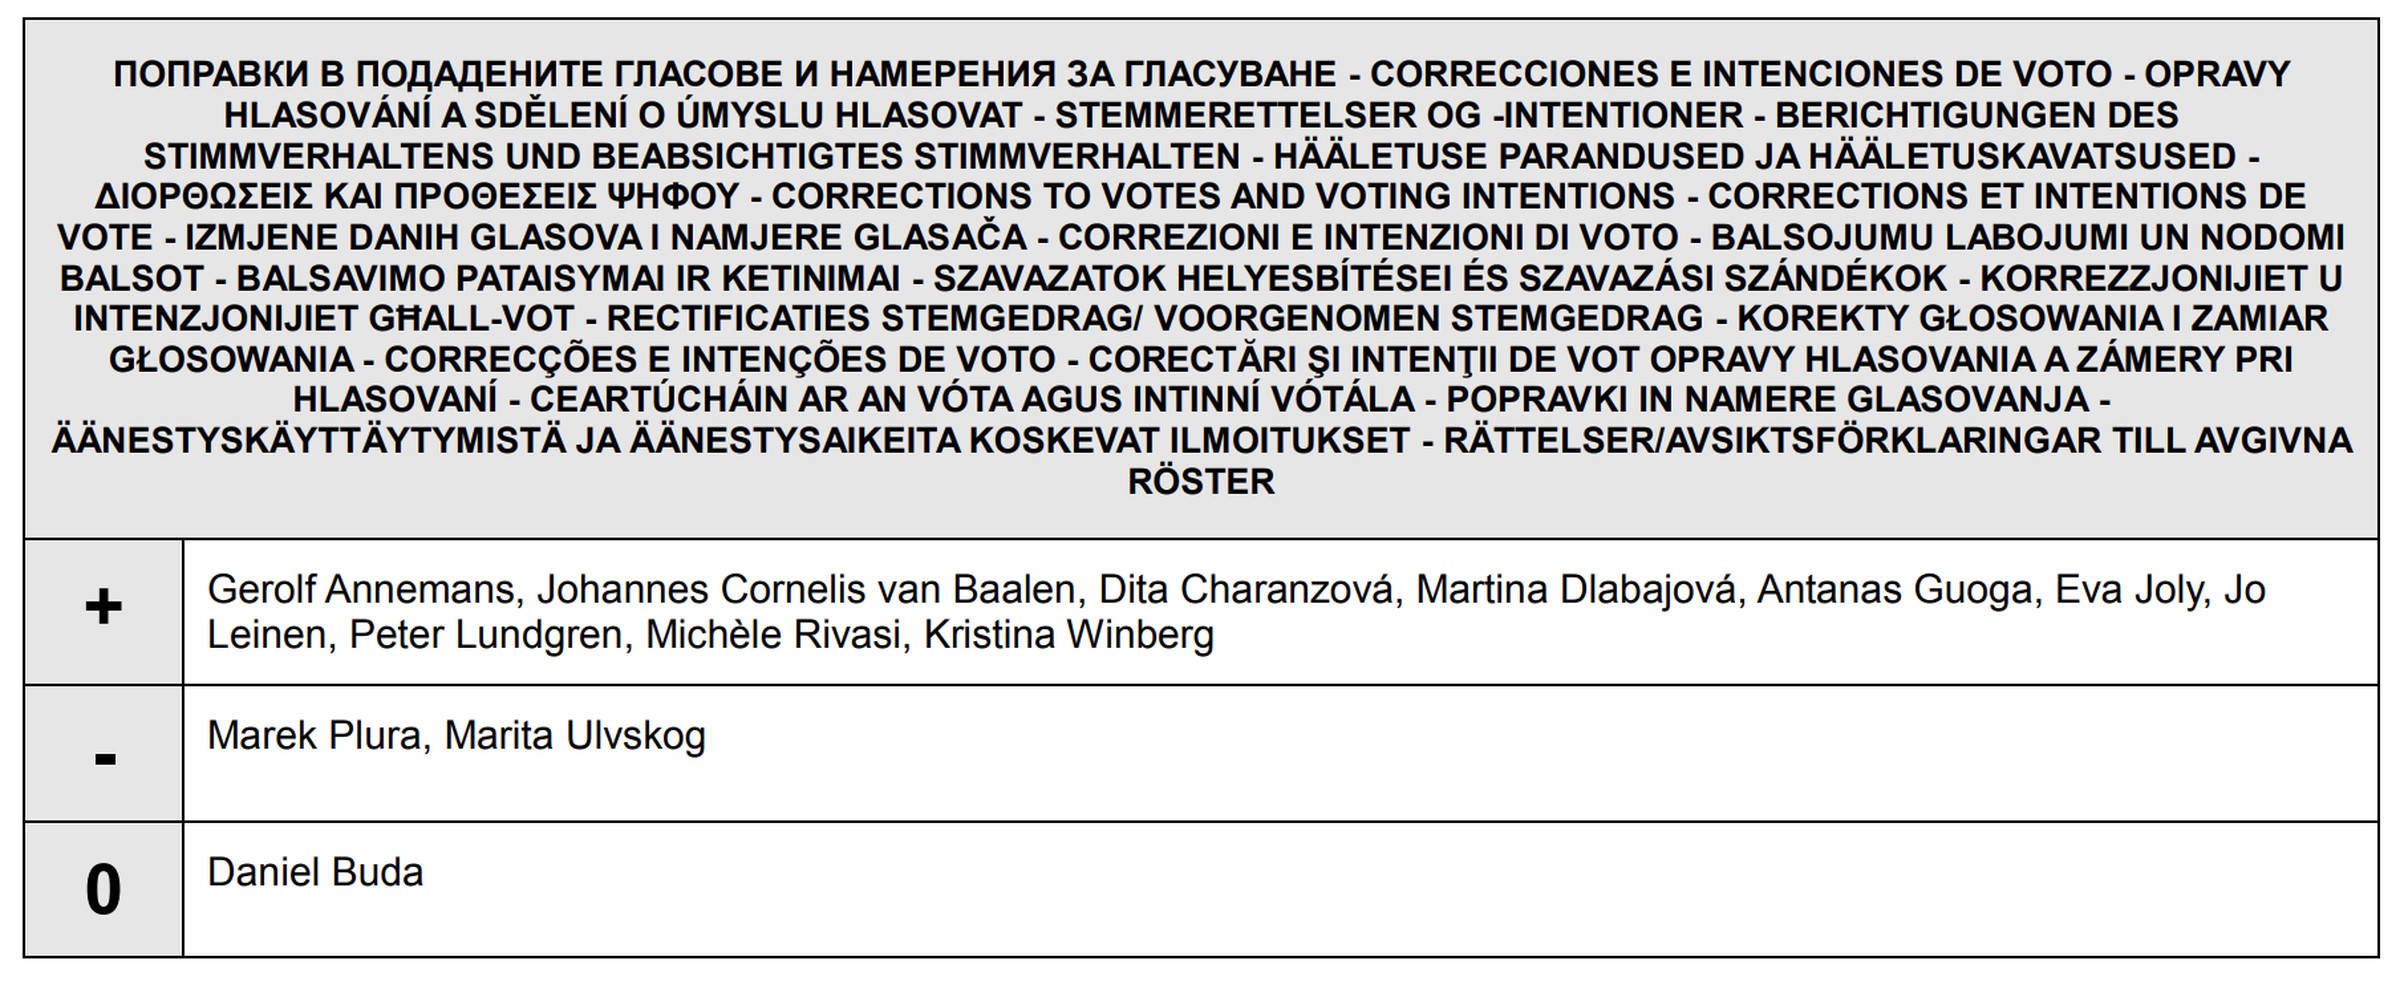 The official voting record from the EU shows that 10 MEPs intended to approve the amendment.